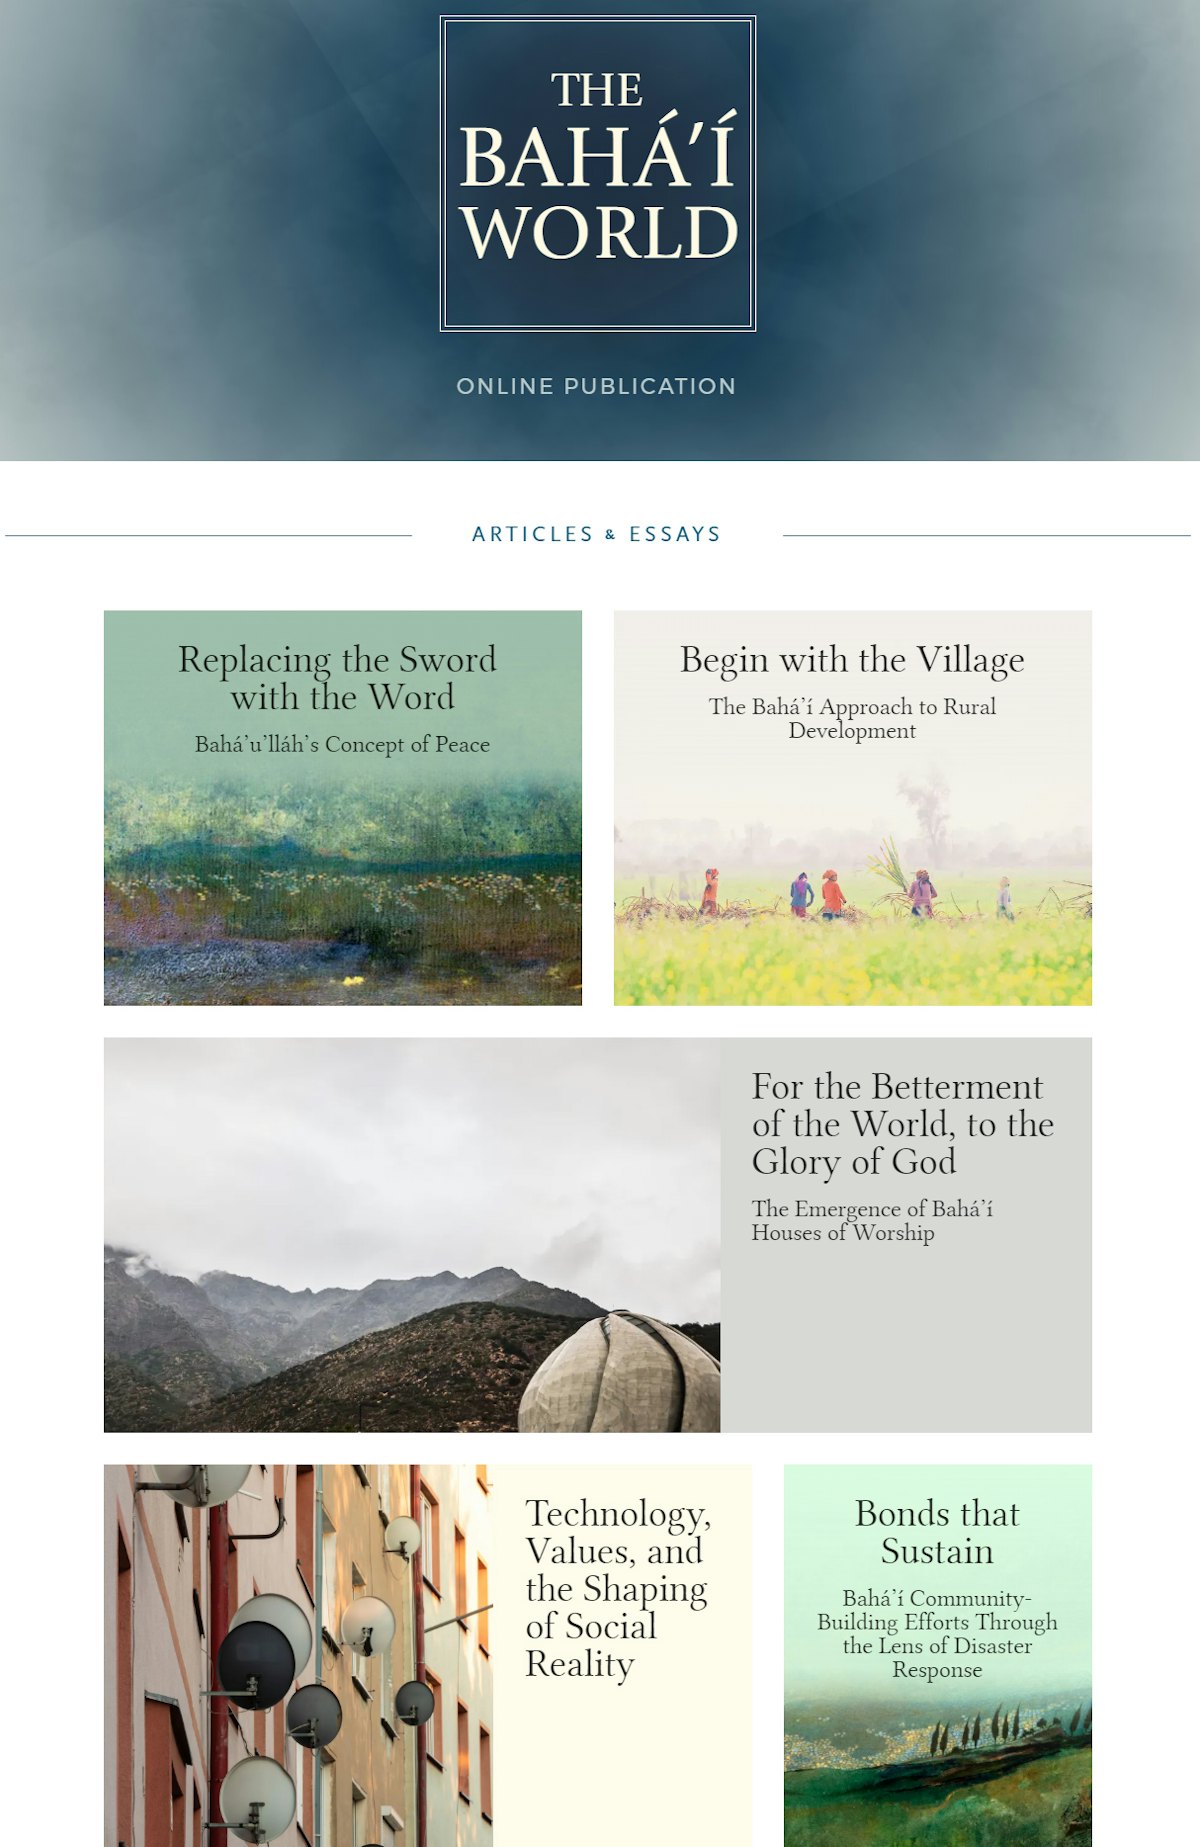 A new official Baha’i website makes available thoughtful essays and articles on contemporary issues and developments.